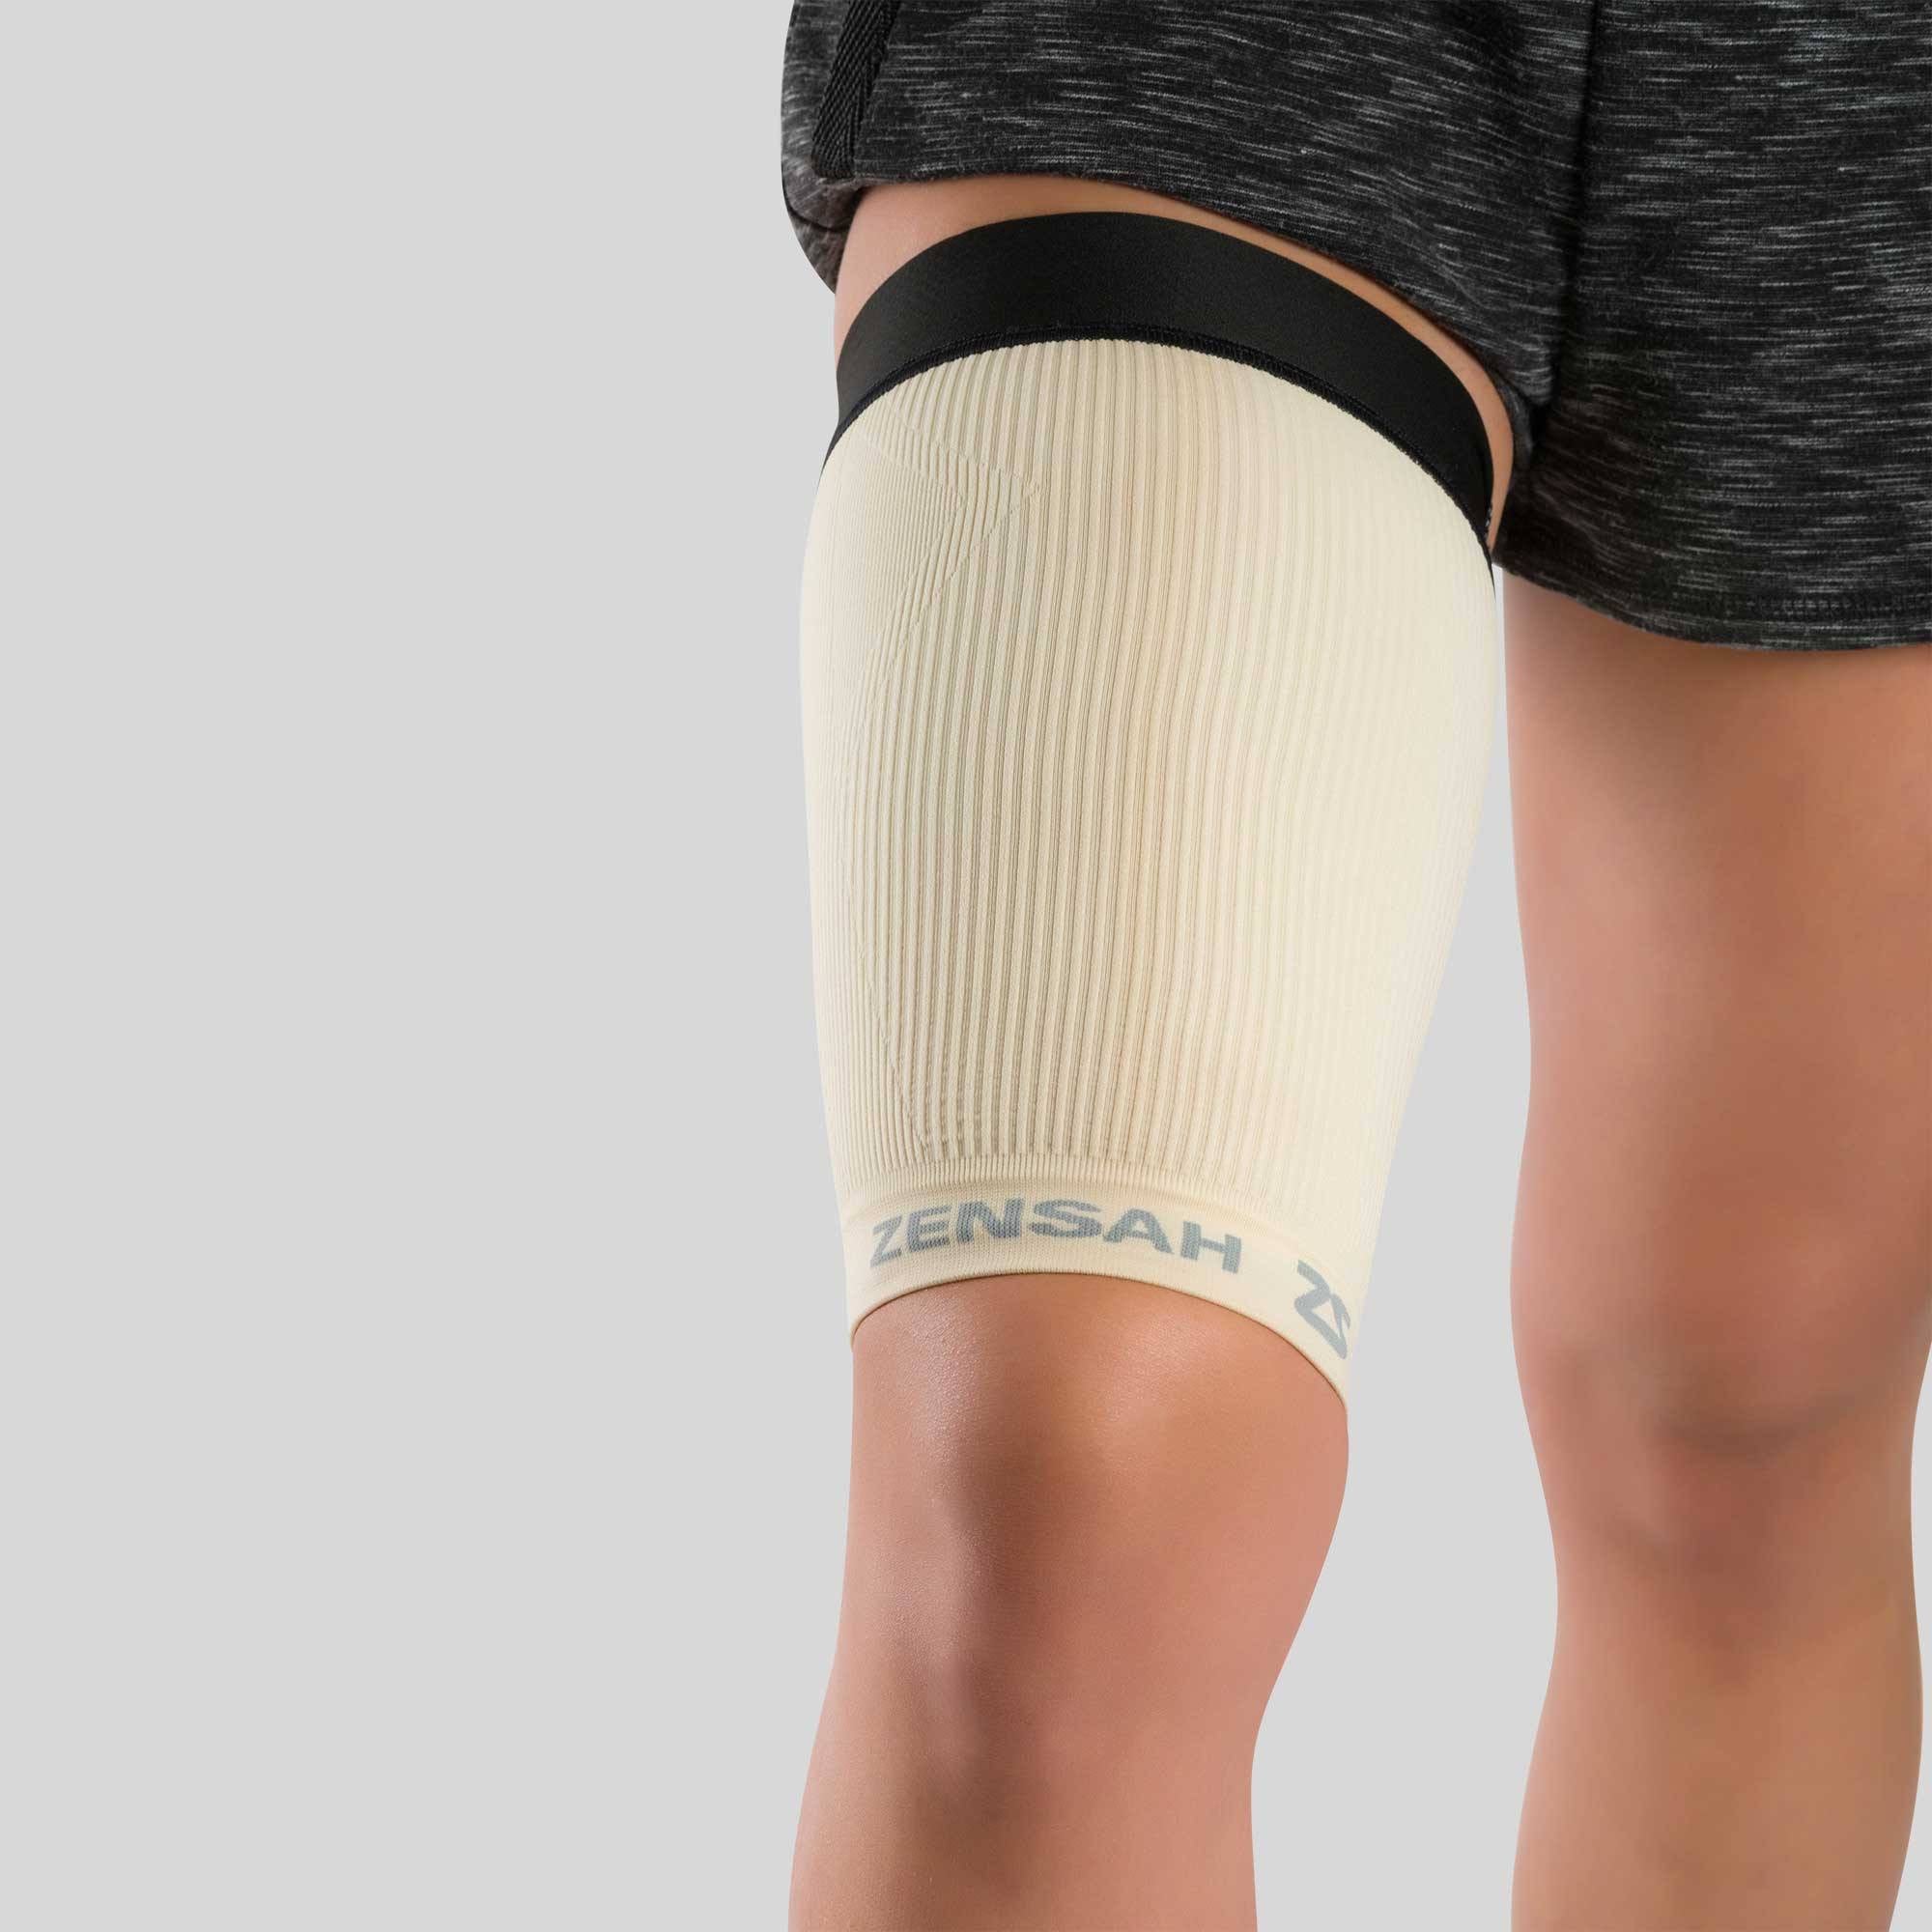 beister Thigh Compression Sleeves Hamstring Support: 20-30 mmhg